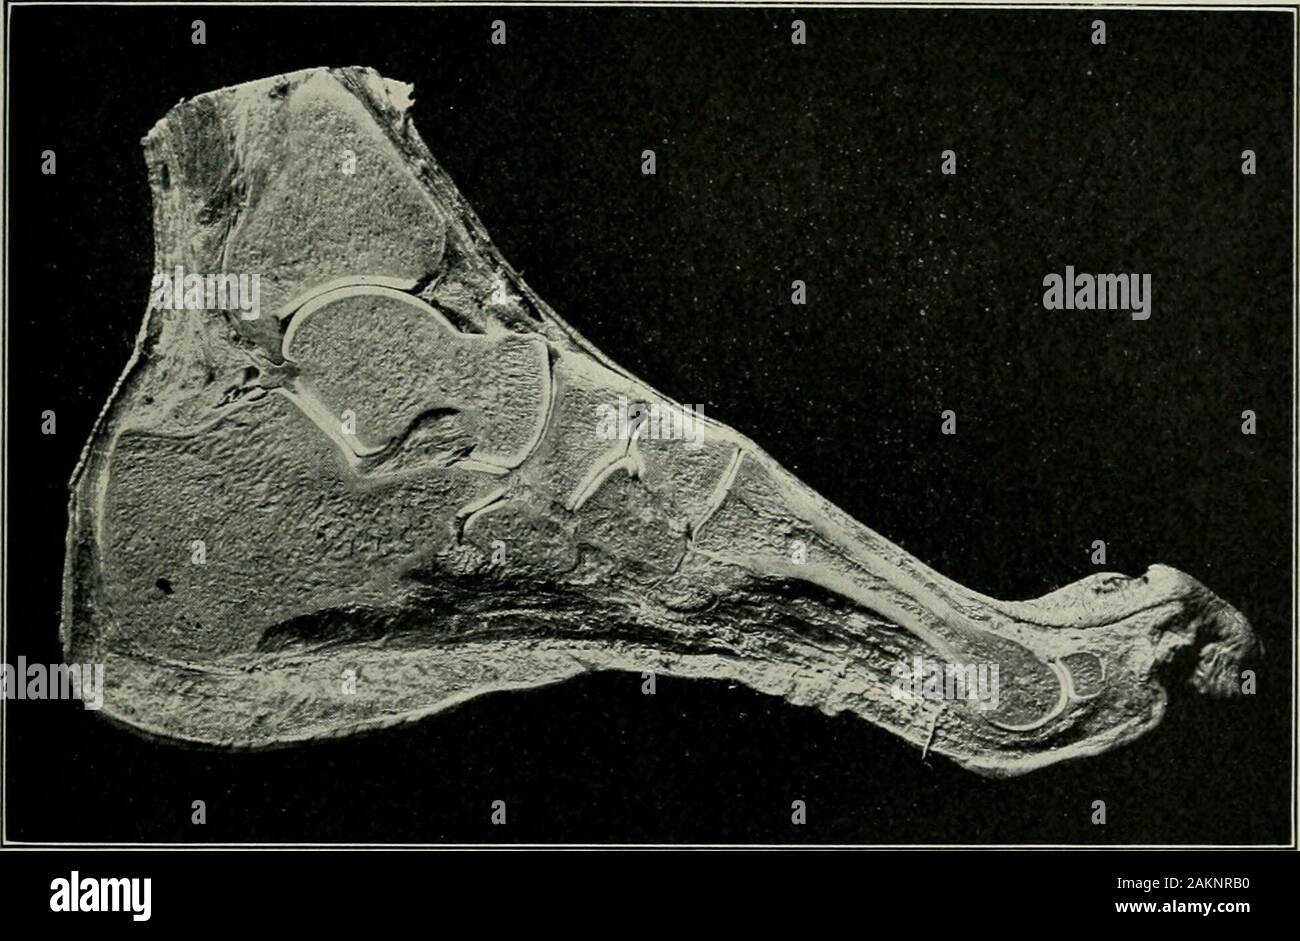 American practice of surgery : a complete system of the science and art of surgery . that position the widest part of the astragalus has passedfrom between the tibia and fibula, and the ligaments are more relaxed than inthe full plantar flexion, so that lateral movement to a limited extent is under TUBERCULOUS DISEASE OF BONES AND JOINTS. 713 such circumstances possible. When full dorsal flexion is brought about, theanterior and widest part of the superior articular surface of the astragaluspasses between the fibula and tibia and even to a sight extent separates thefibula from the tibia suffic Stock Photo